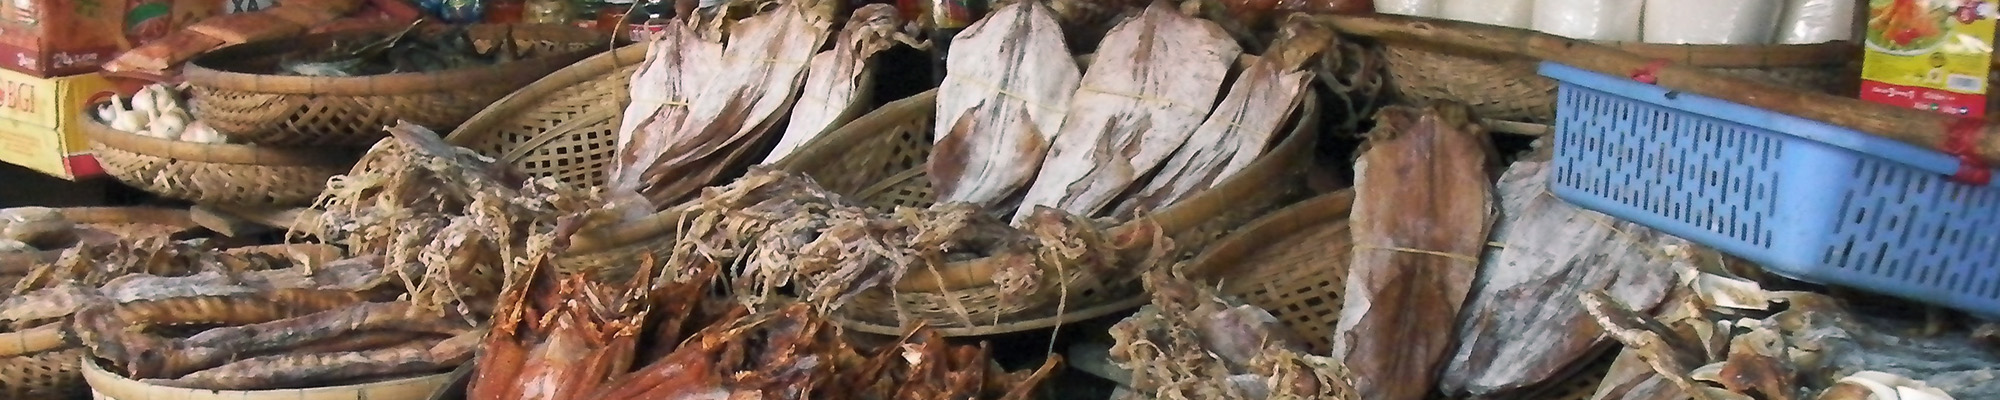 Vietnam_dried fish products for sale